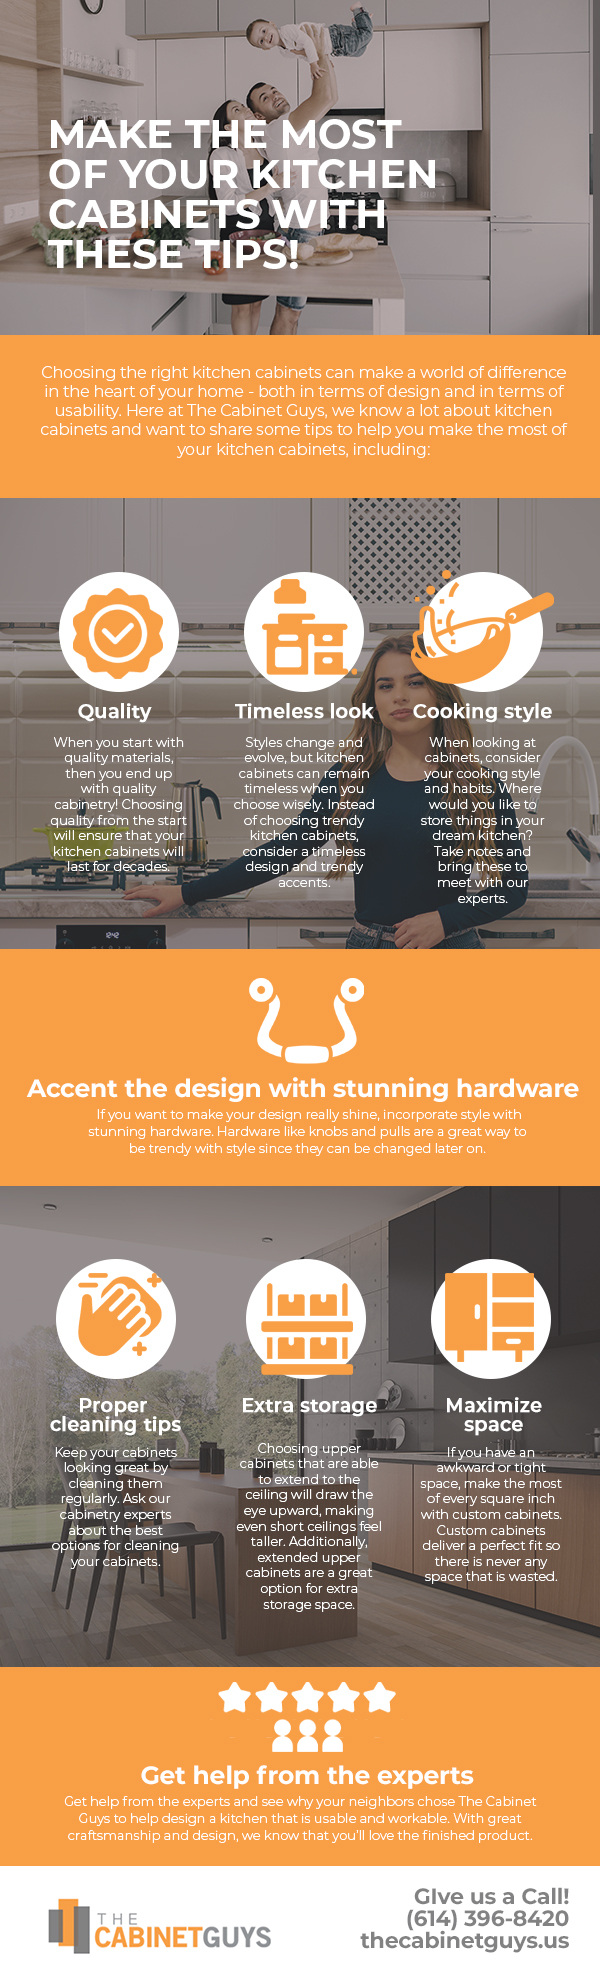 Make the Most of Your Kitchen Cabinets with These Tips! [infographic]